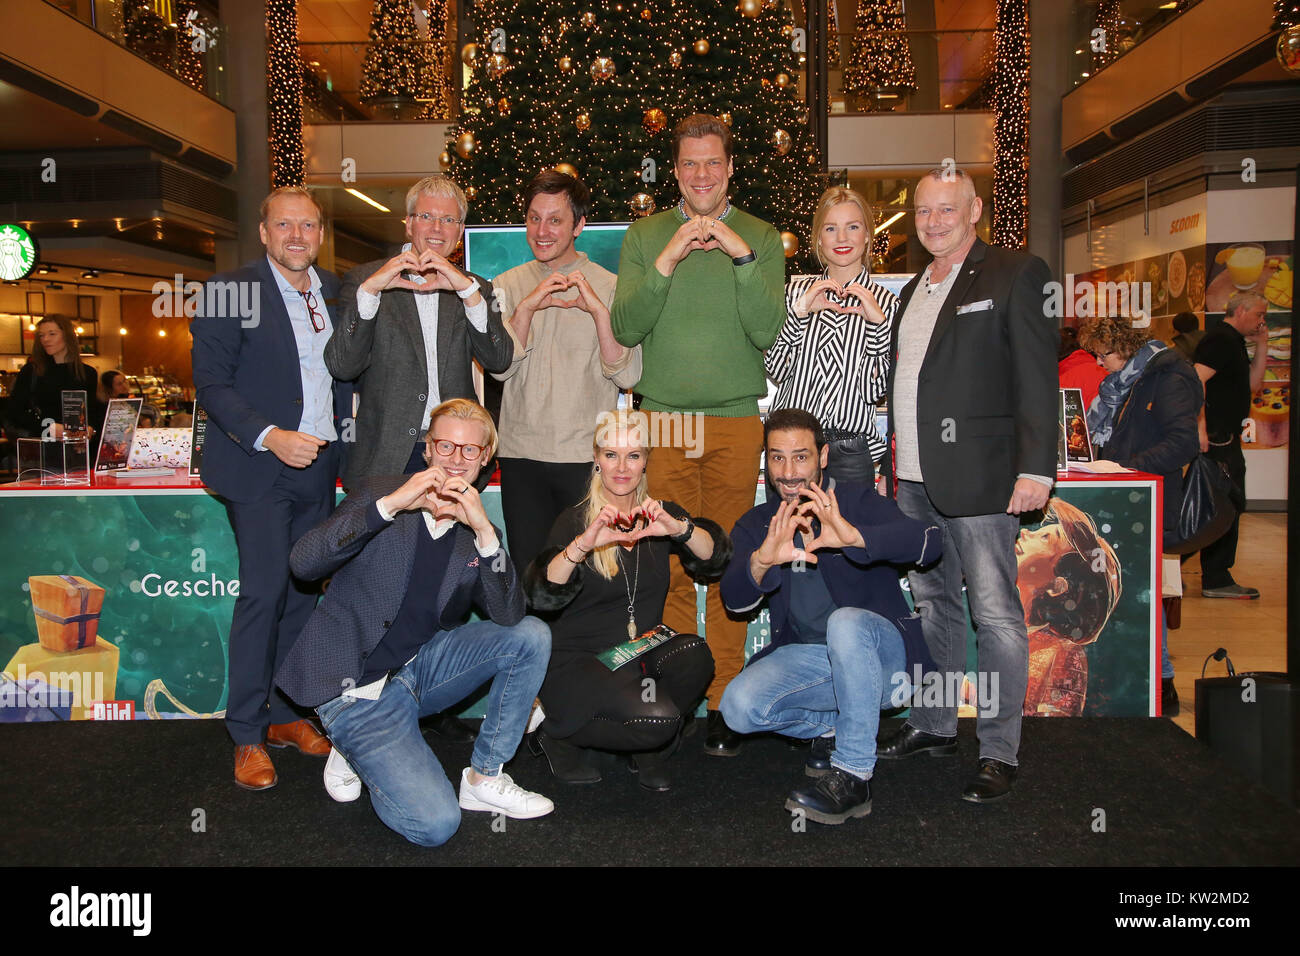 Charity gift wrapping with stars for 'Ein Herz fuer Kinder' at the shopping mall Europa Passage in Hamburg  Featuring: Kim Sarah Brandts, Anna Heesch, Tim Koller, Harry Schulz, Volkan Baydar, Tetje Mierendorf und Gerhard Loewe (Manager) Where: Hamburg, Germany When: 27 Nov 2017 Credit: Becher/WENN.com Stock Photo